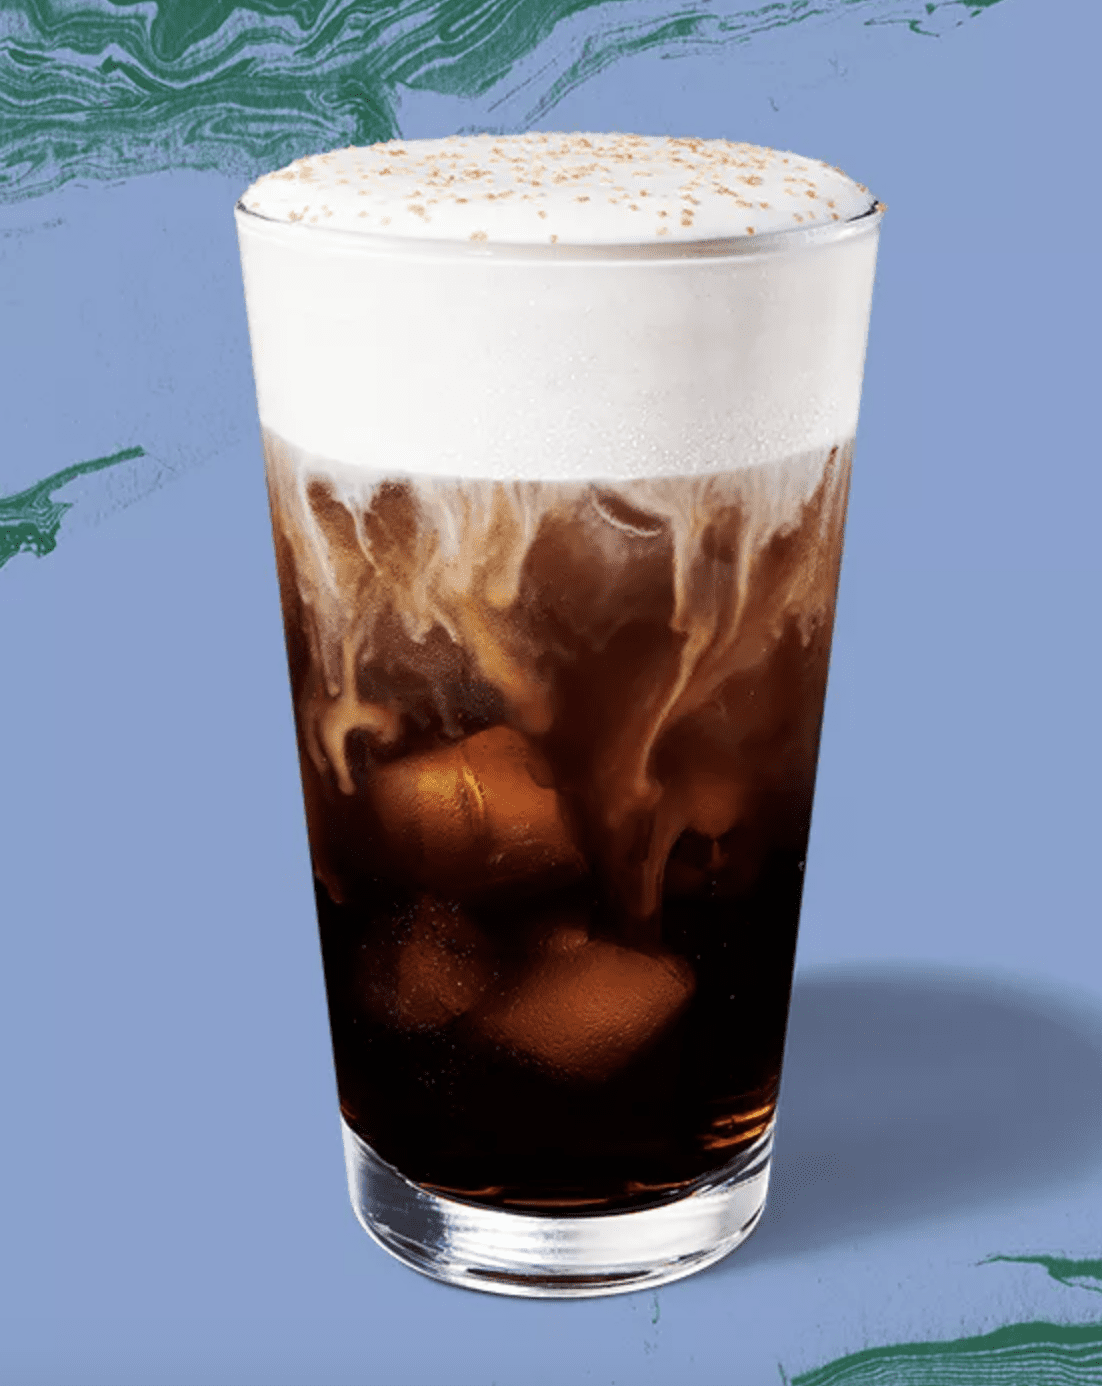 Starbucks Goes All In, Introduces Trendy Cold-Brew Coffee - Eater